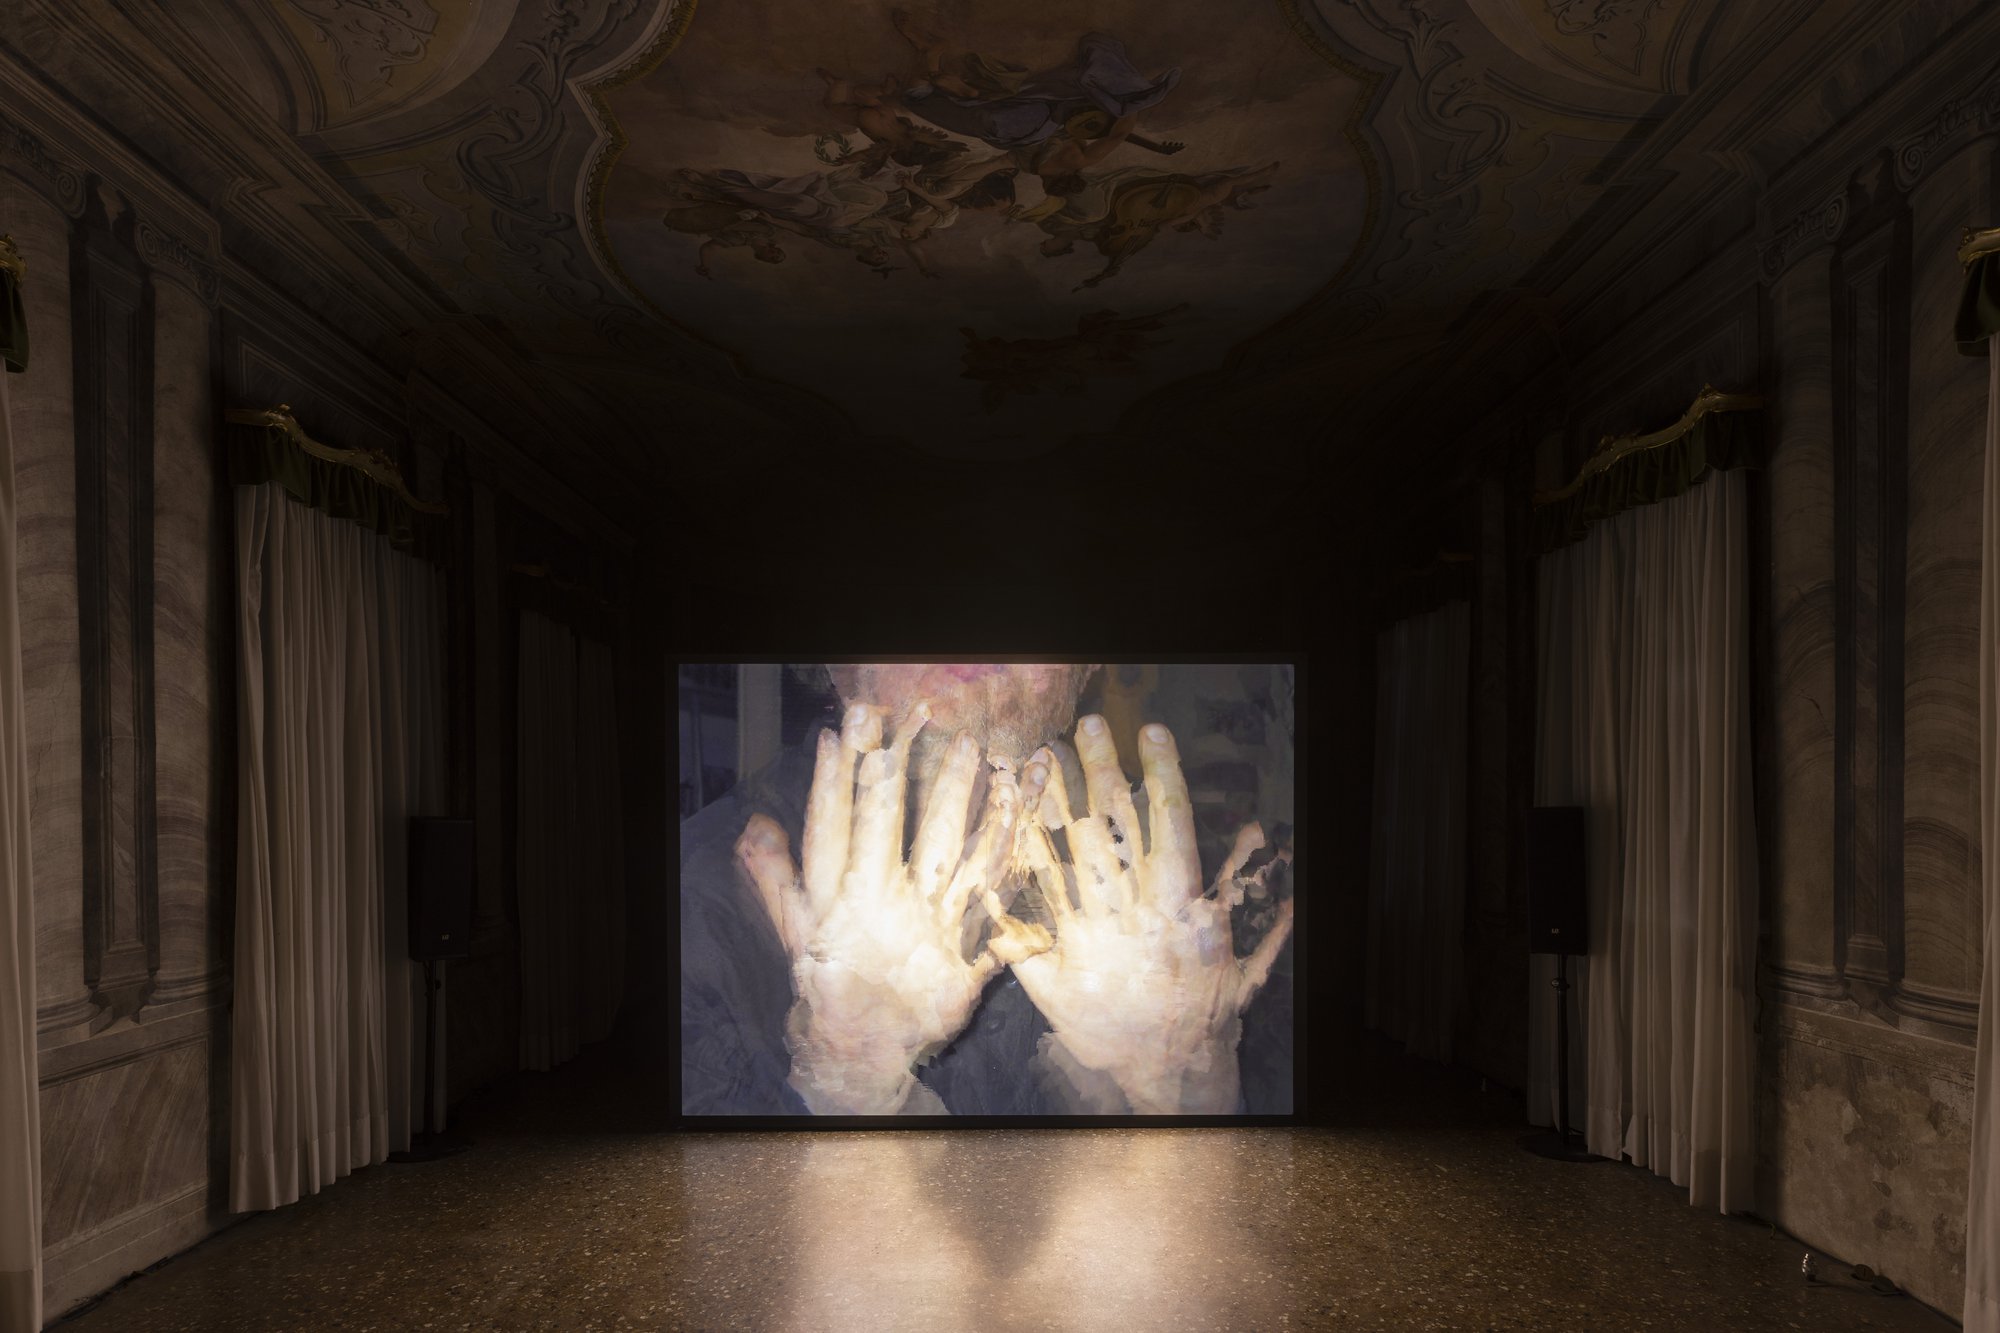 James Richards, Qualities of Life: Living in the Radiant Cold, digital video, colour, sound, 17 min., 2022. Installation view, Penumbra, Fondazione In Between Art Film, Complesso dell’Ospedaletto, Venice, 2022